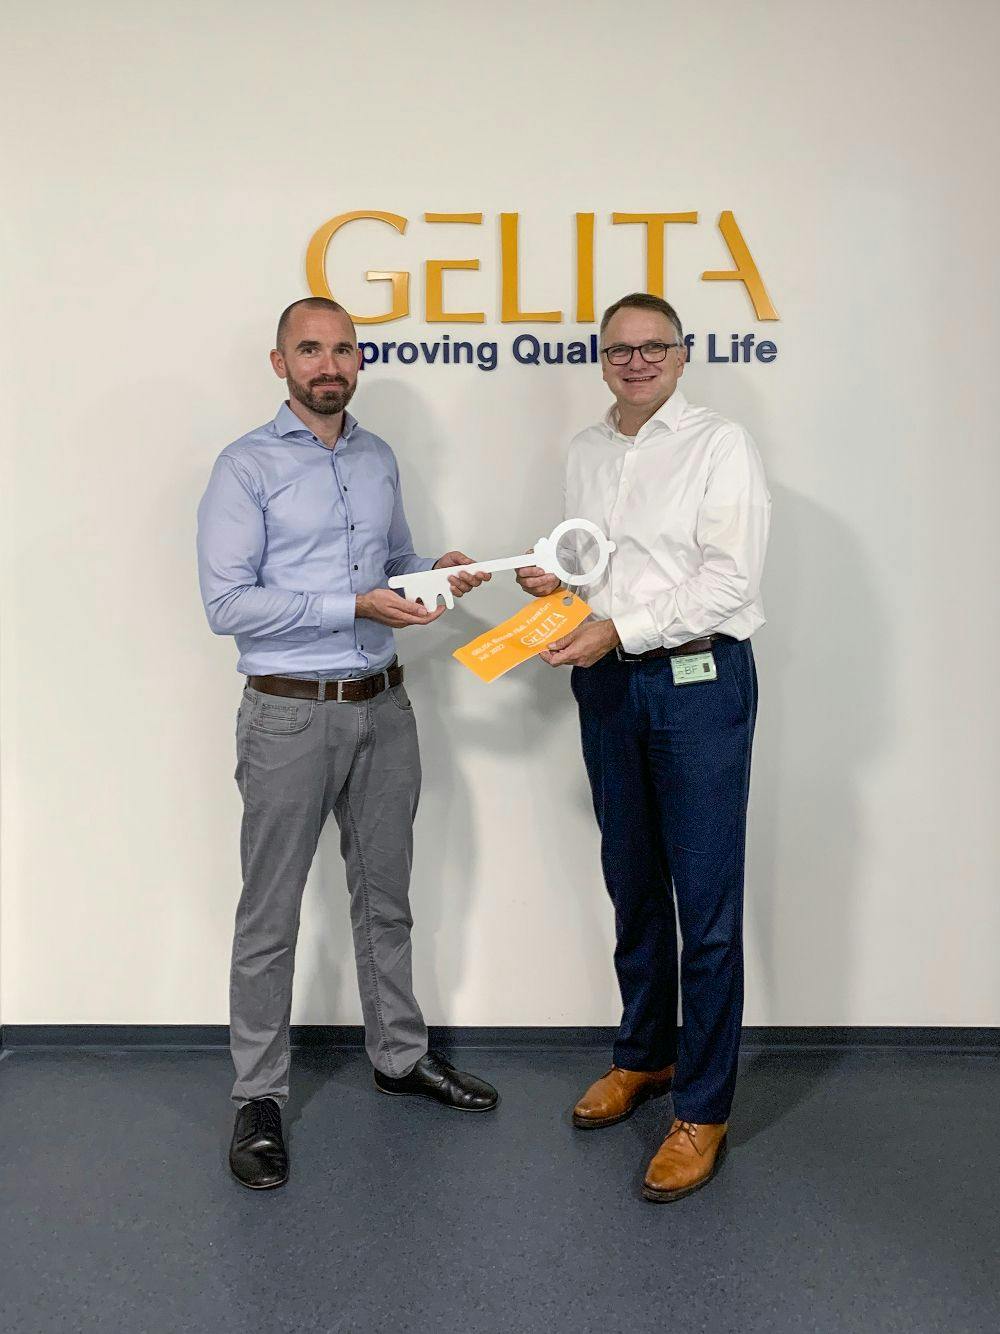 Pictured: (left) Christoph Schorsch, PhD, head of Gelita’s new biotech hub, and (right) Sven Abend, PhD, CEO of Gelita AG, at the opening ceremony for Gelita’s new Biotech Hub in Frankfurt am Main, Germany. Photo from Gelita.